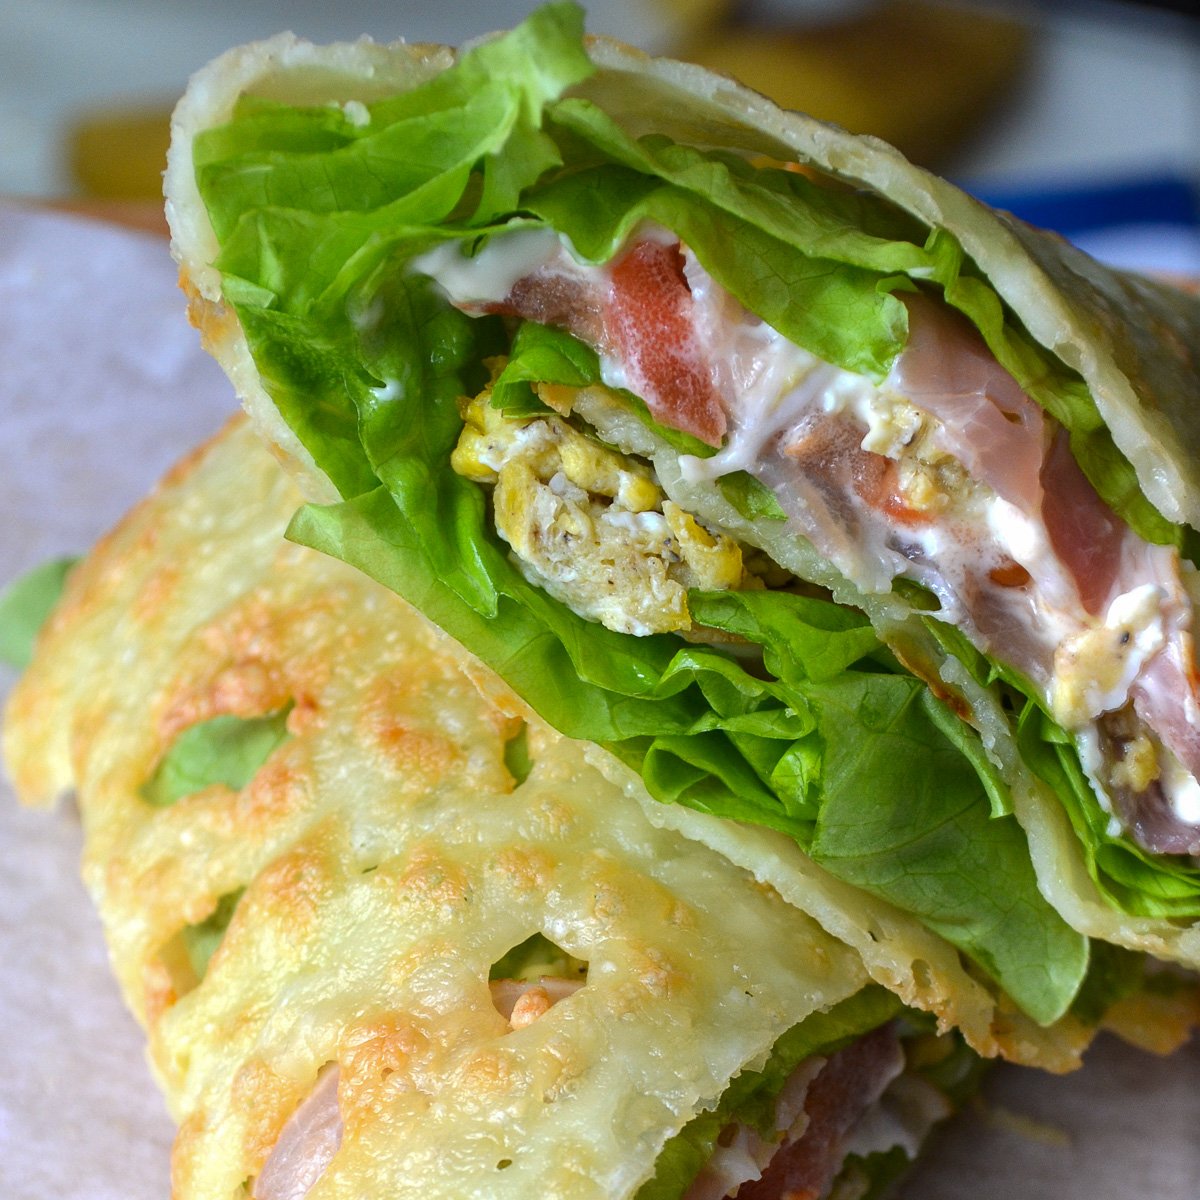 Keto breakfast cheese wrap ready for eating